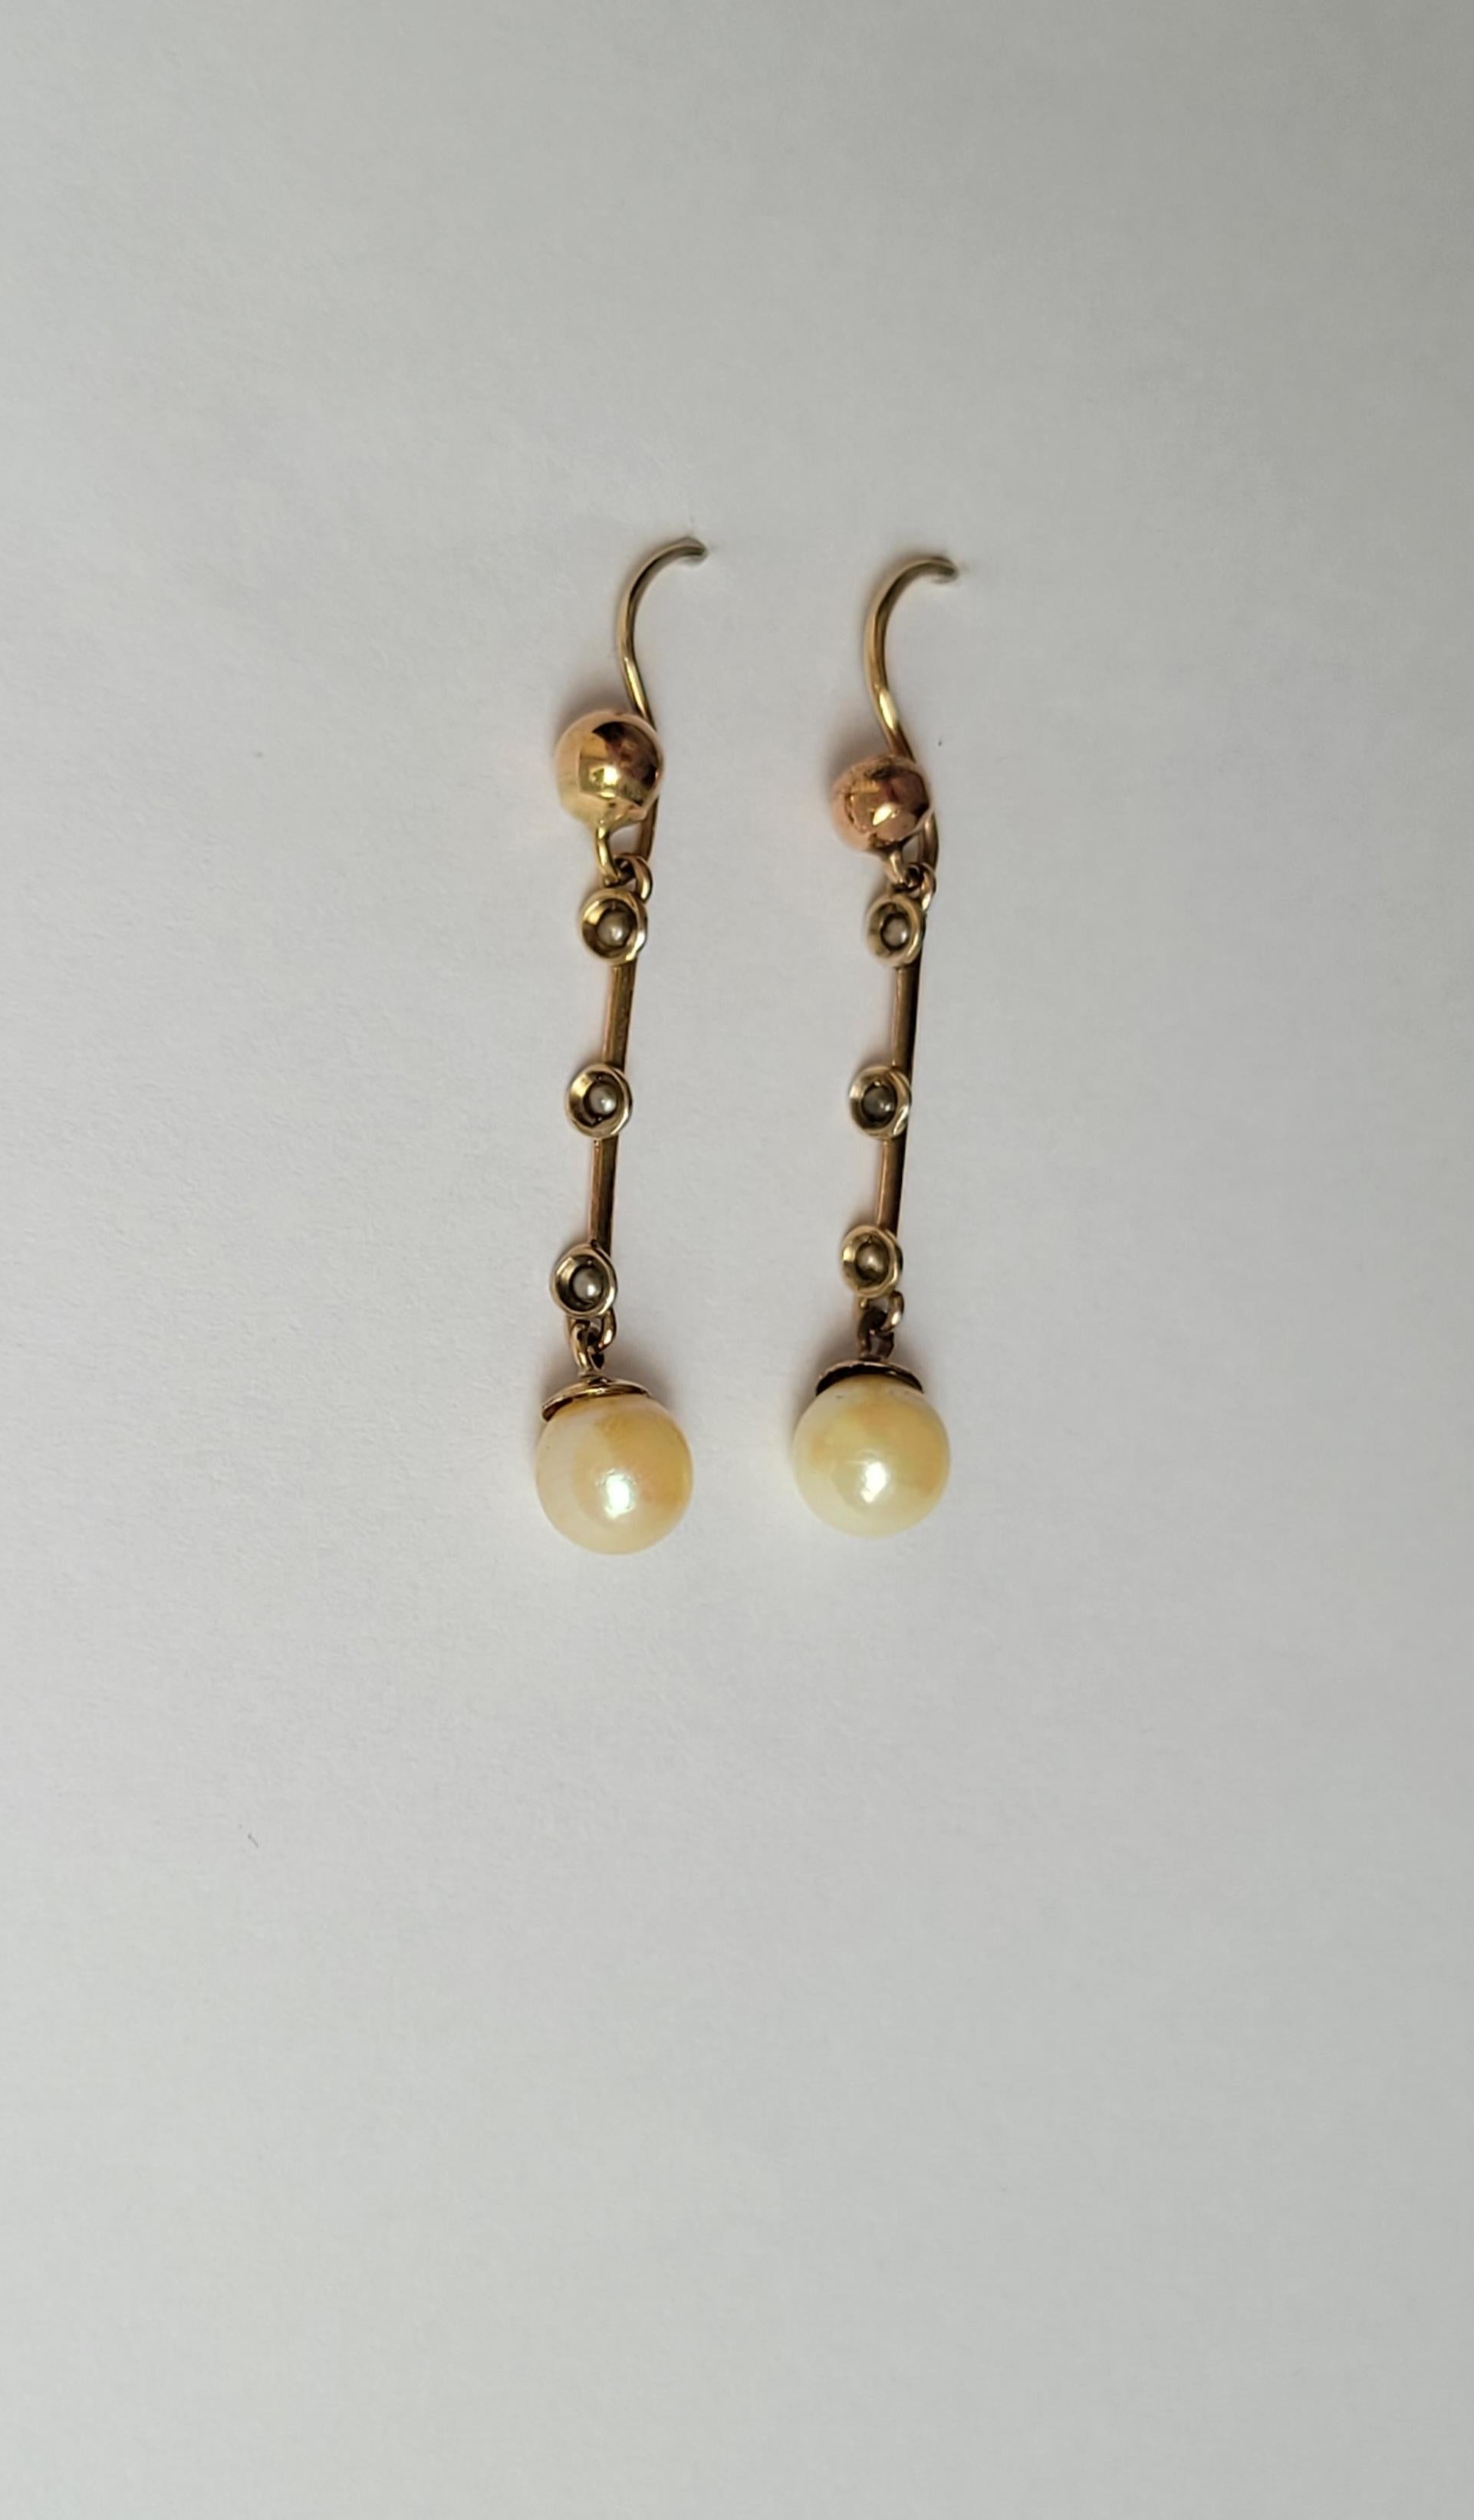 A Lovely Edwardian 9 carat Yellow Gold, Pearl and split Seed Pearl drop earrings with a hooks for pierced ears. English origin.

Total drop including hooks 37mm.
Pearl 6mm.
Weight 2.0gr.
Unmarked, tested 9CT gold.

The earrings in good antique